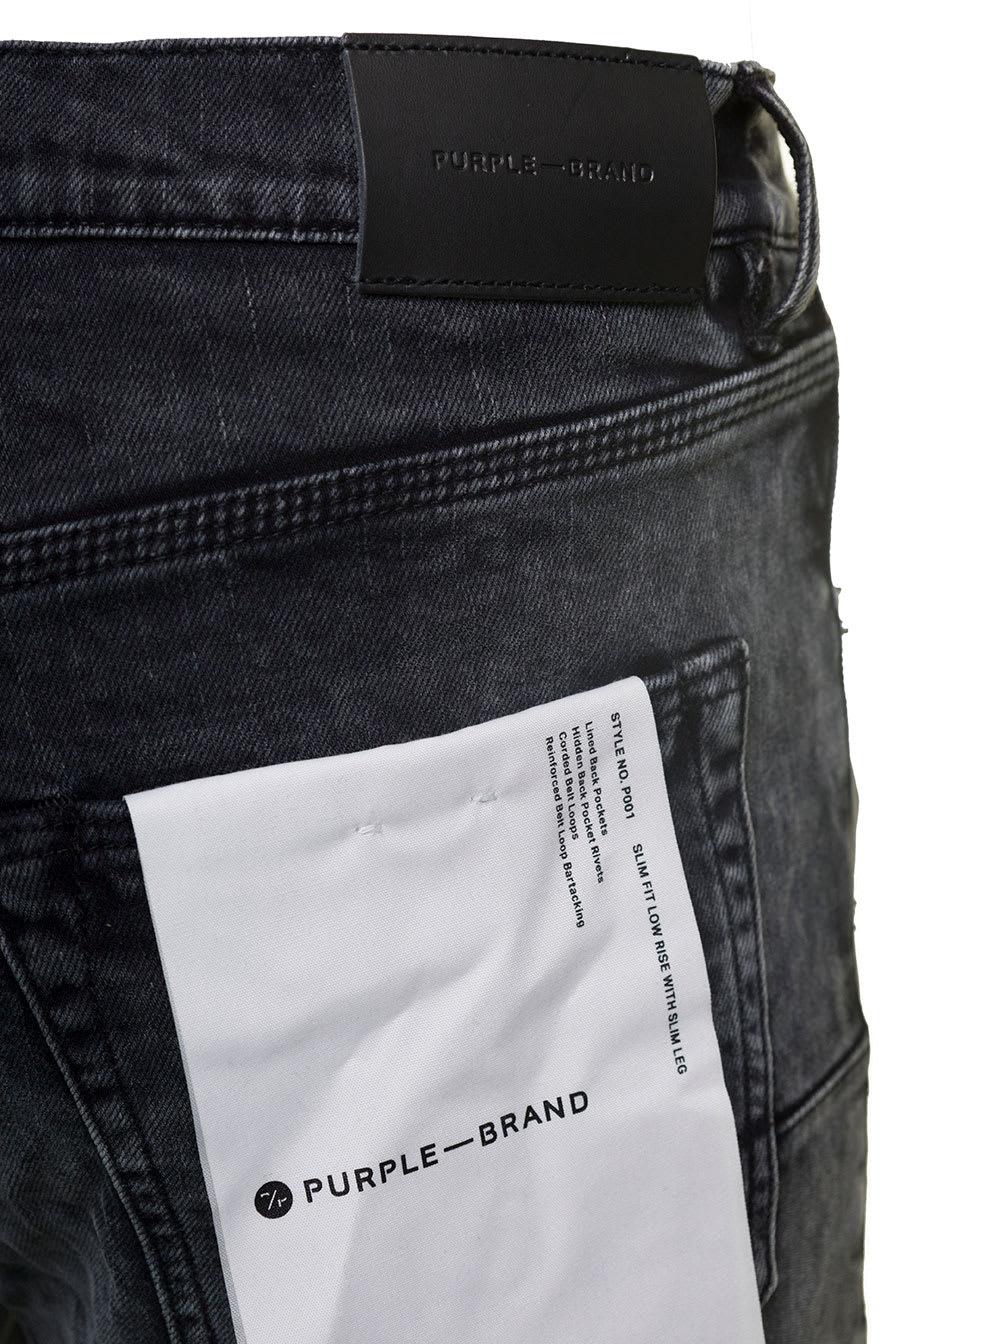 Purple Brand Black Skinny Jeans With Tonal Logo Patch And Crinkled